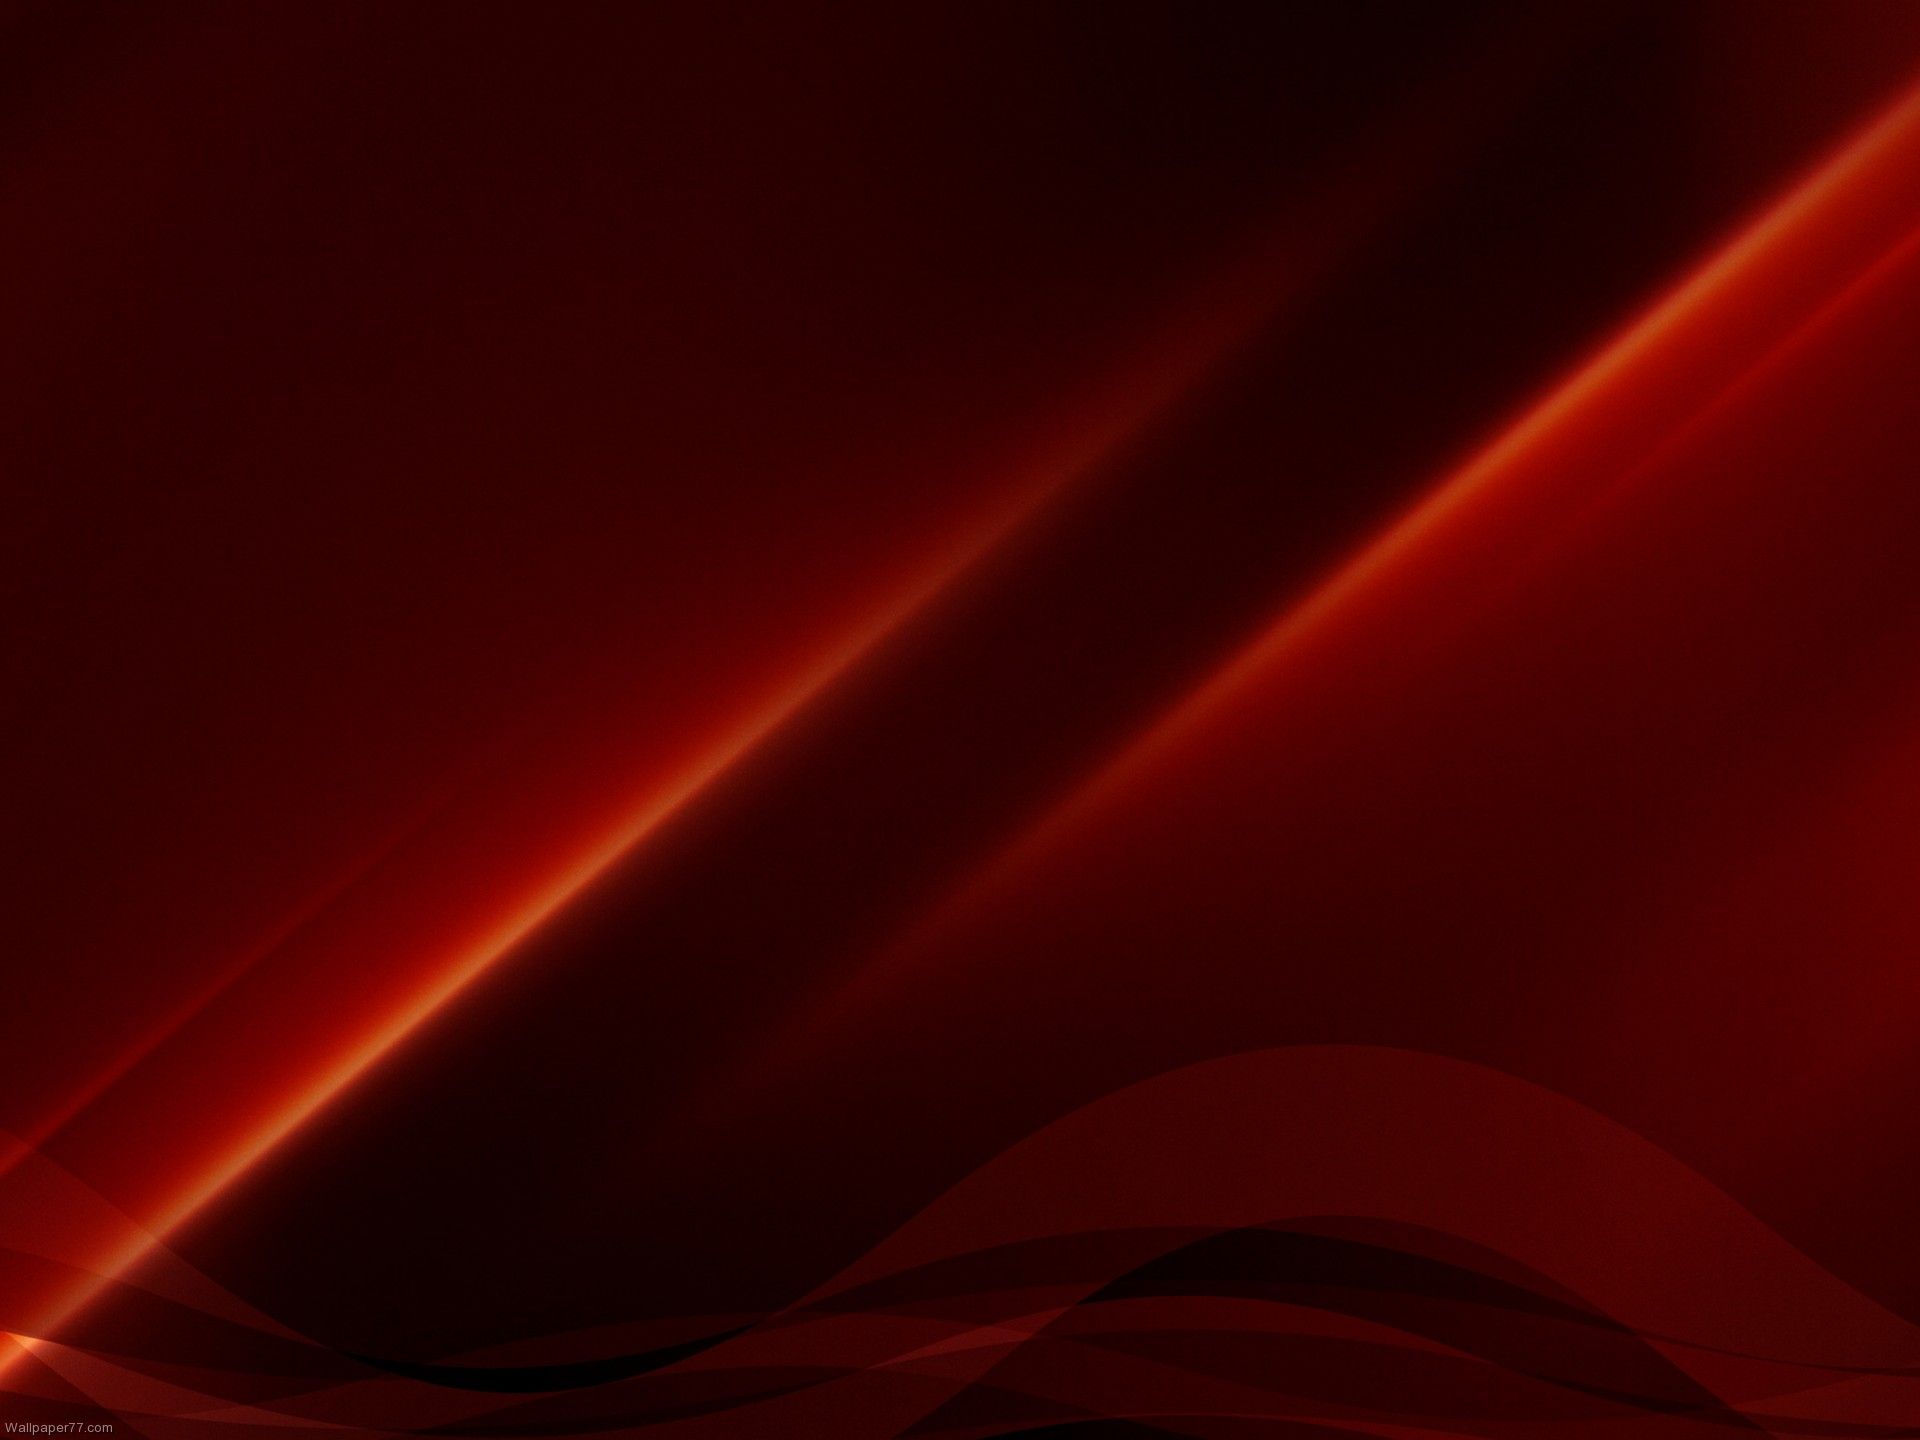 Free download Abstract Maroon Background Wallpaper [1920x1440] for your